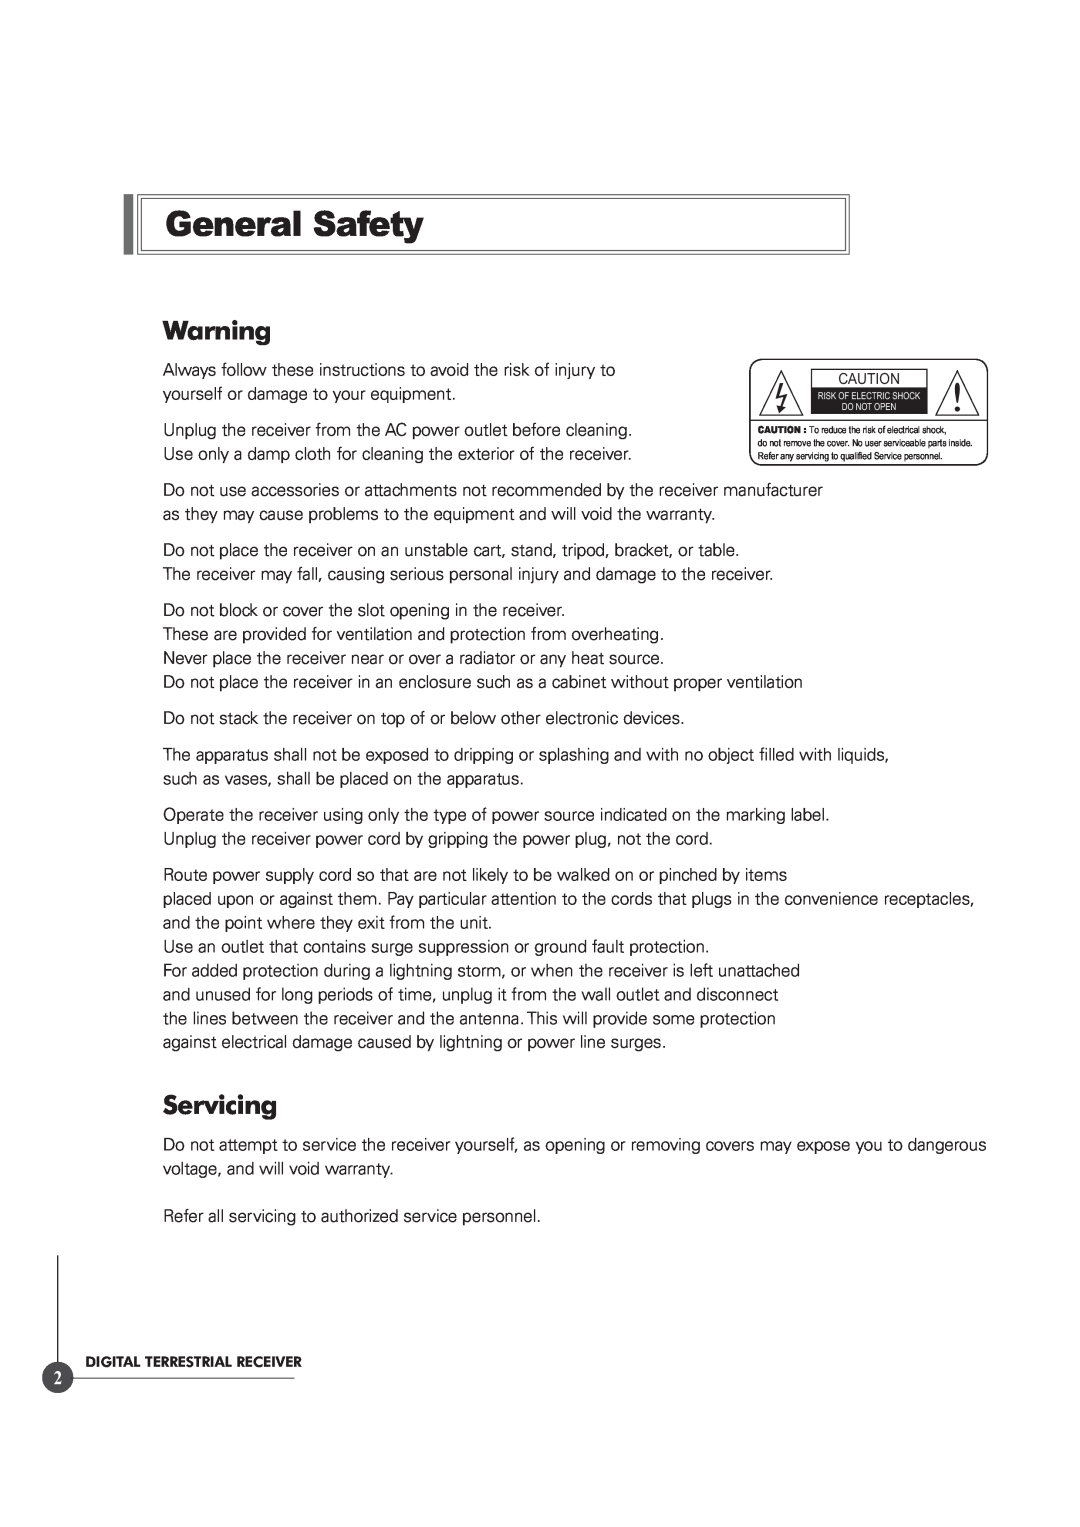 Triax TR 305 manual General Safety, Servicing 